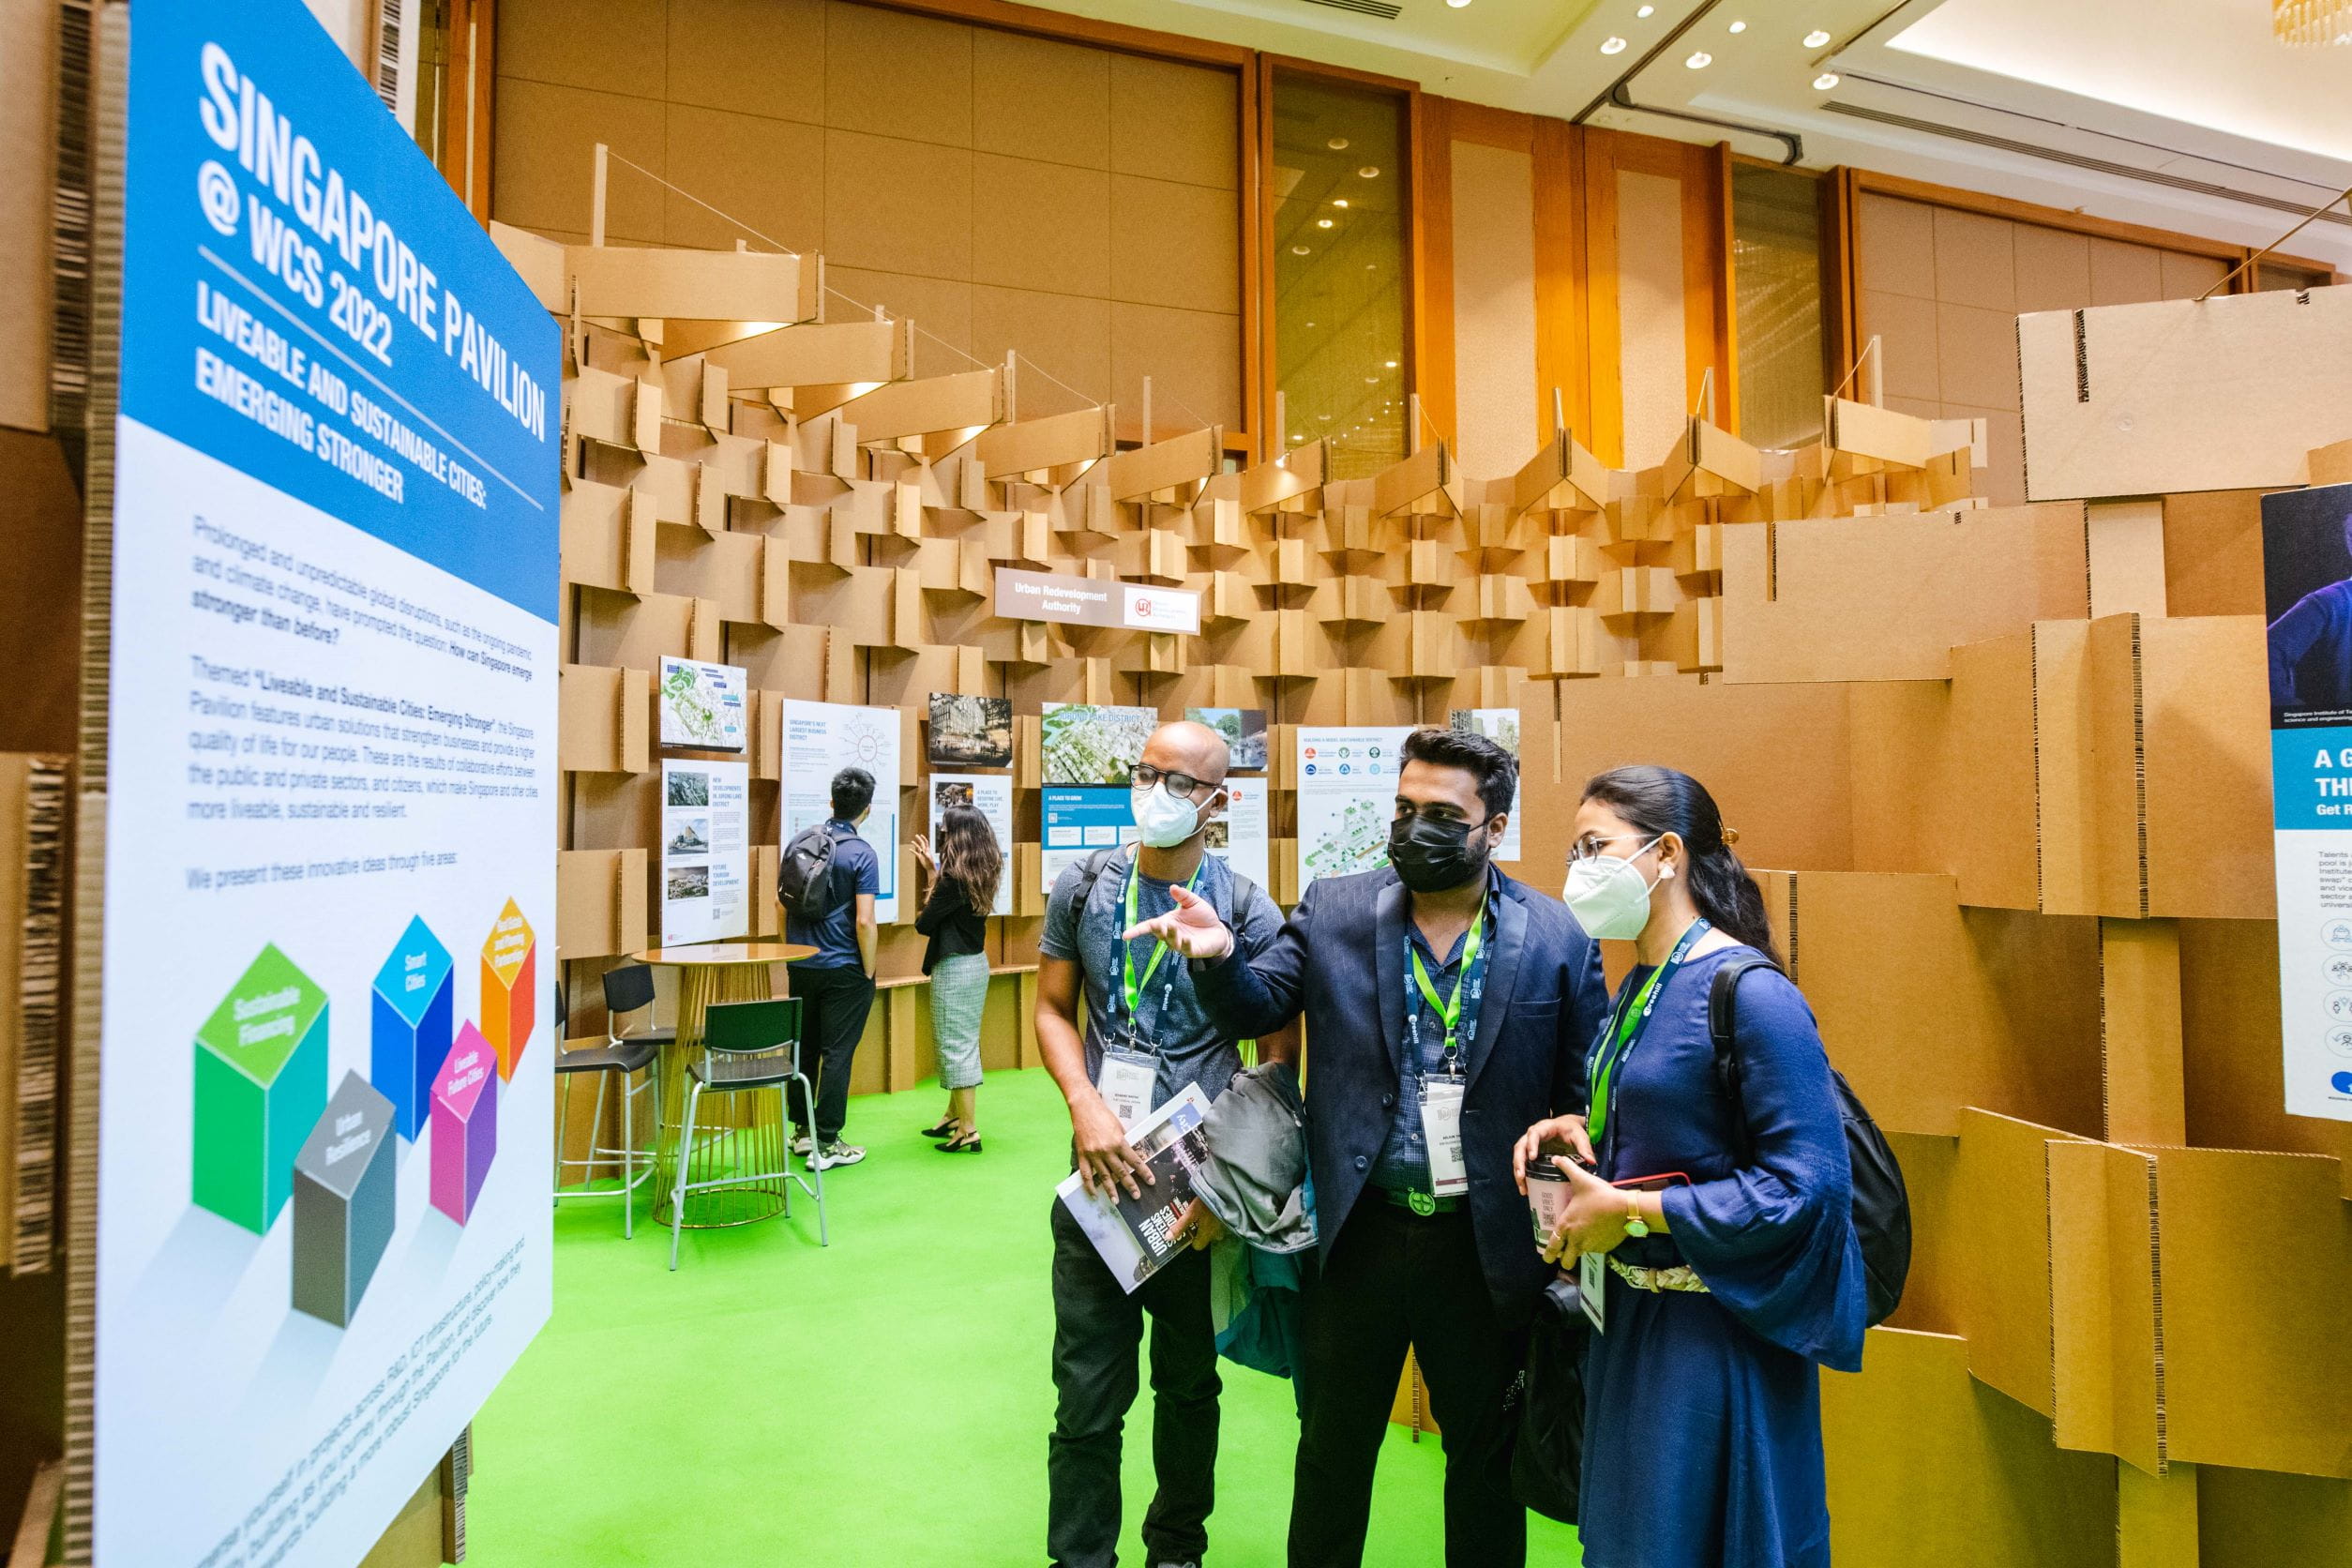 The Fellows exploring the Singapore Pavilion at the biennial World Cities Summit